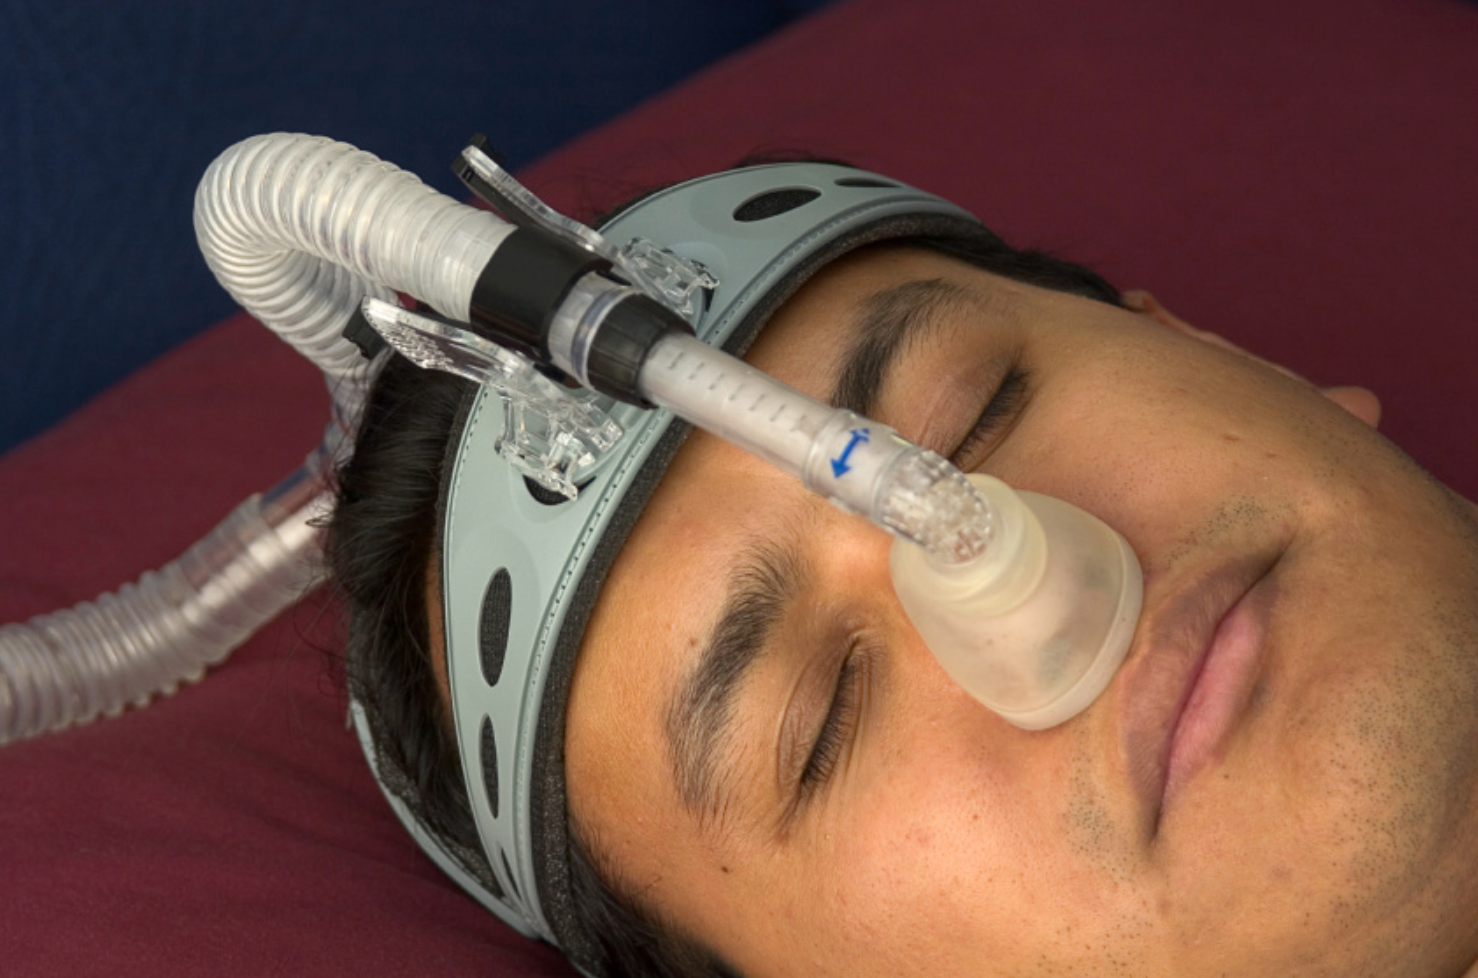 Phase 2 Clinical Trial to Assess Efficacy of Breathing Exercise for Patients With Obstructive Sleep Apnea